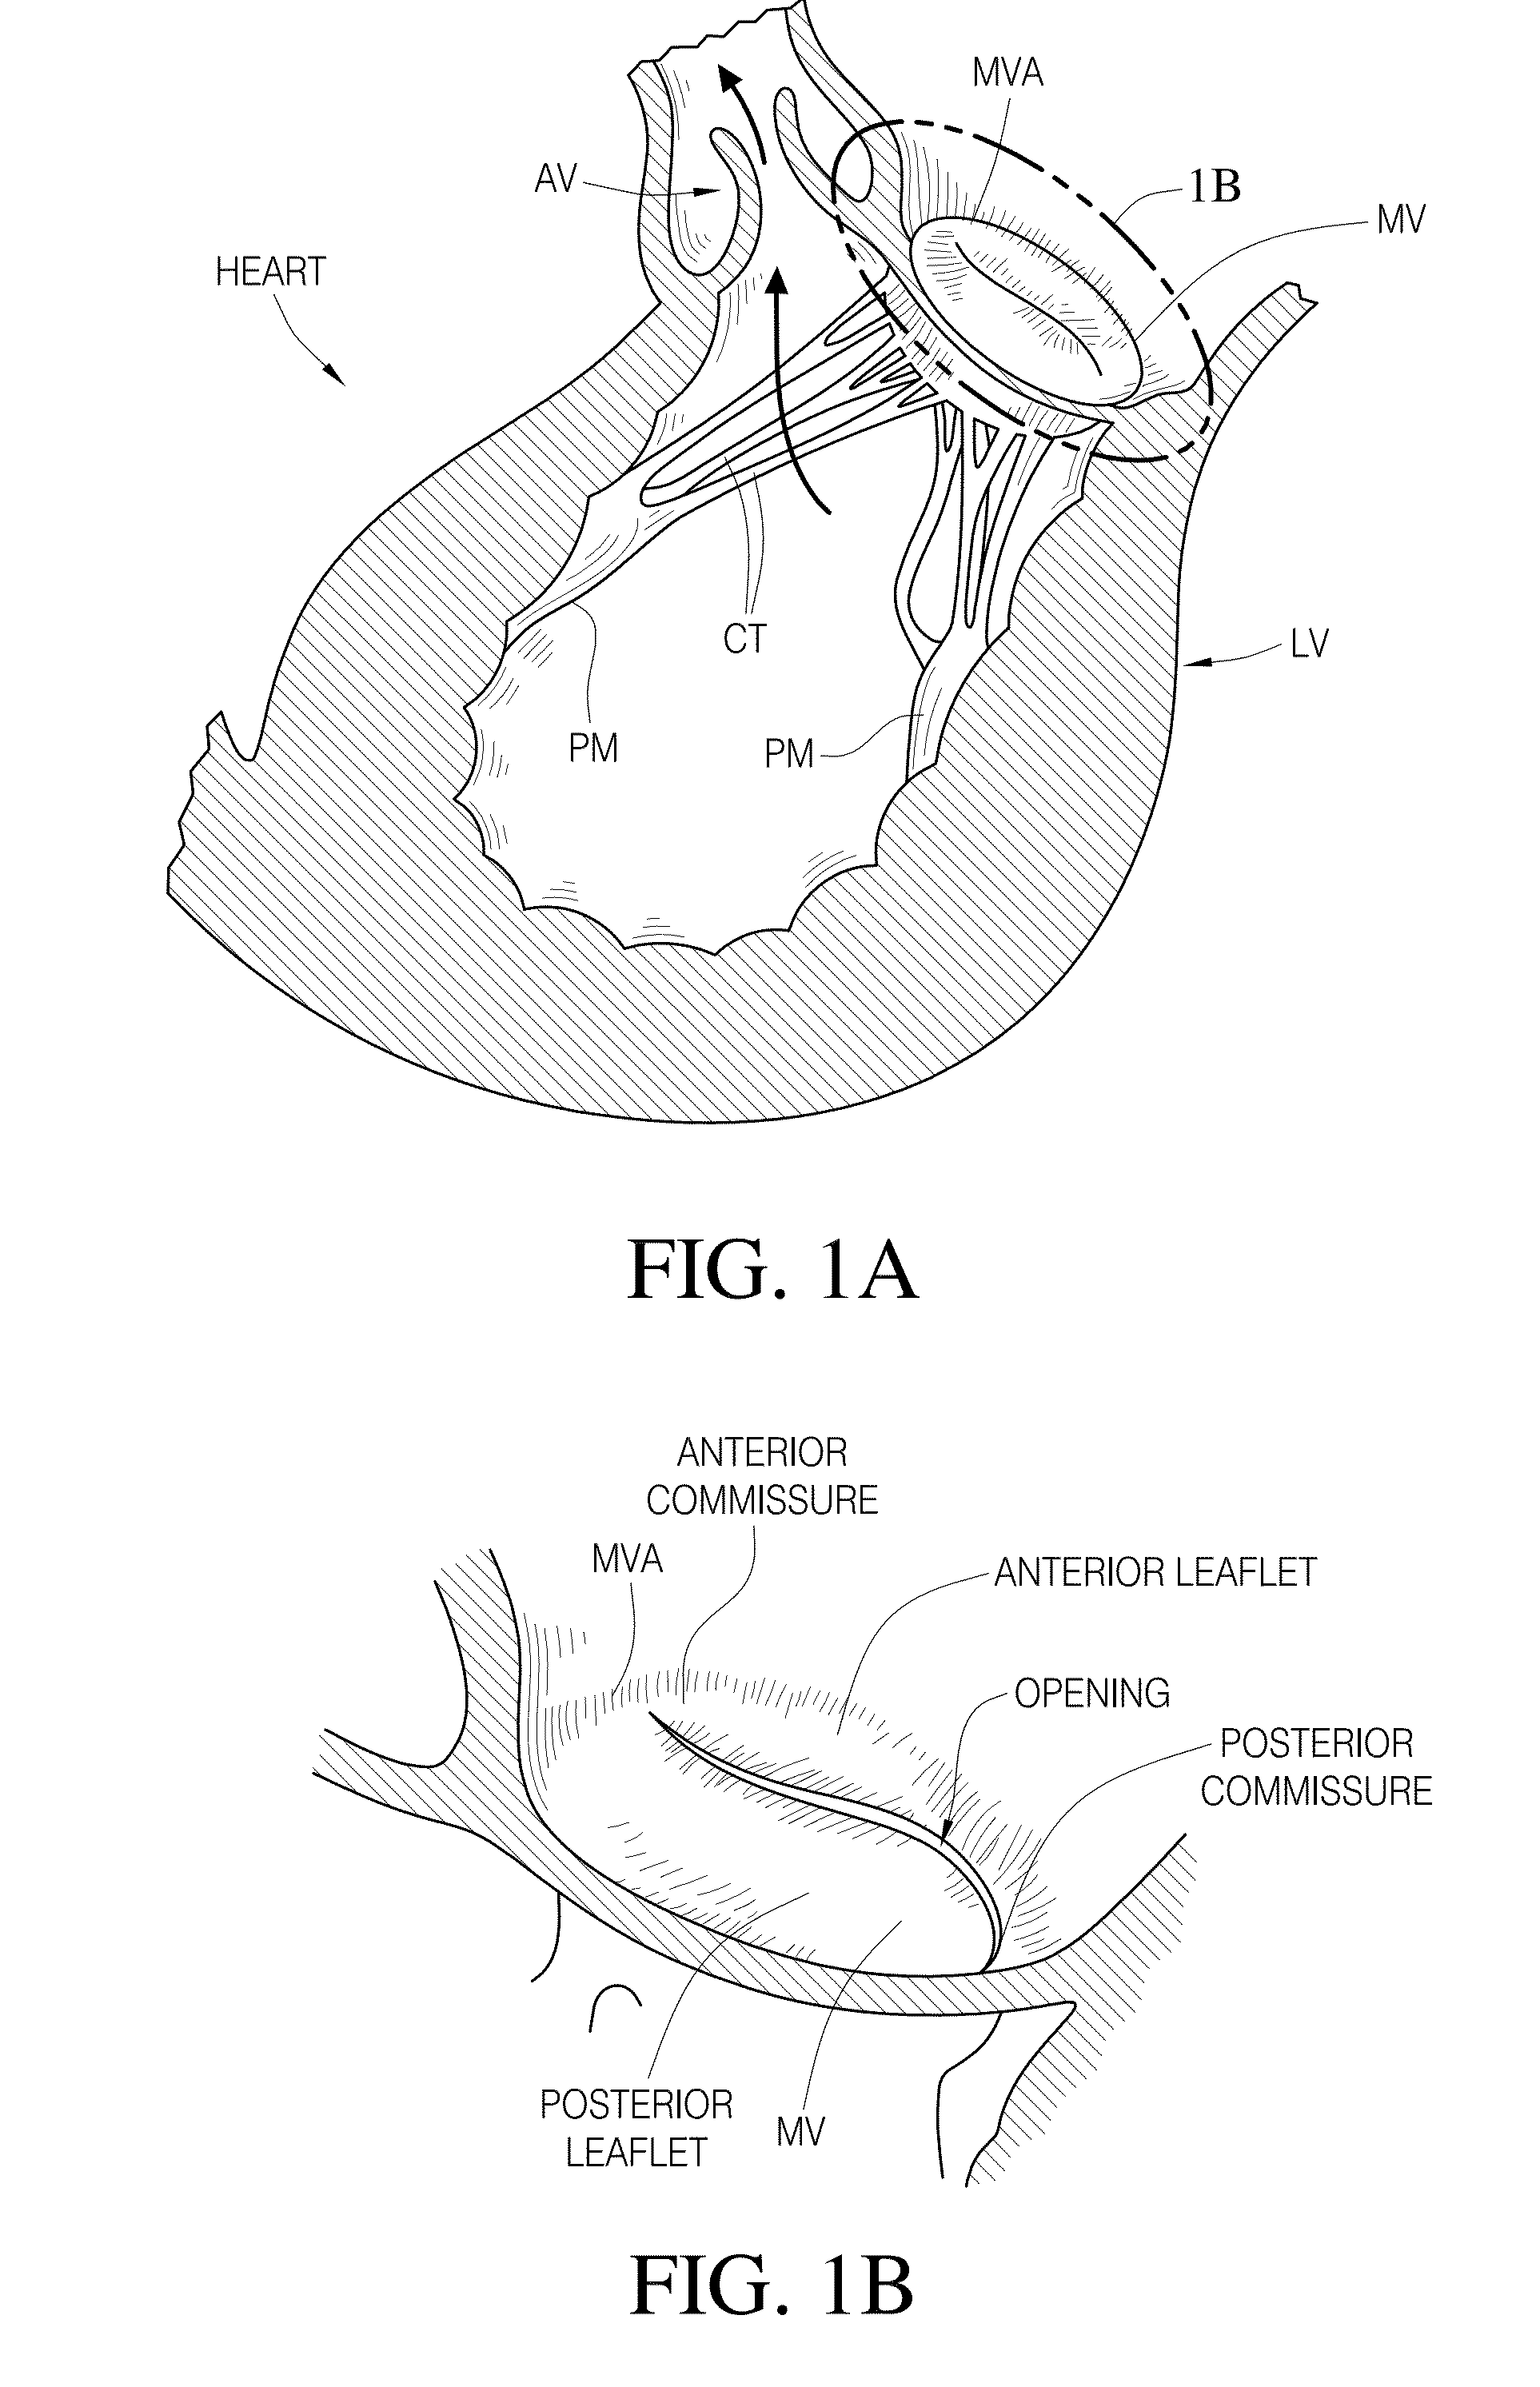 Valve replacement using rotational anchors